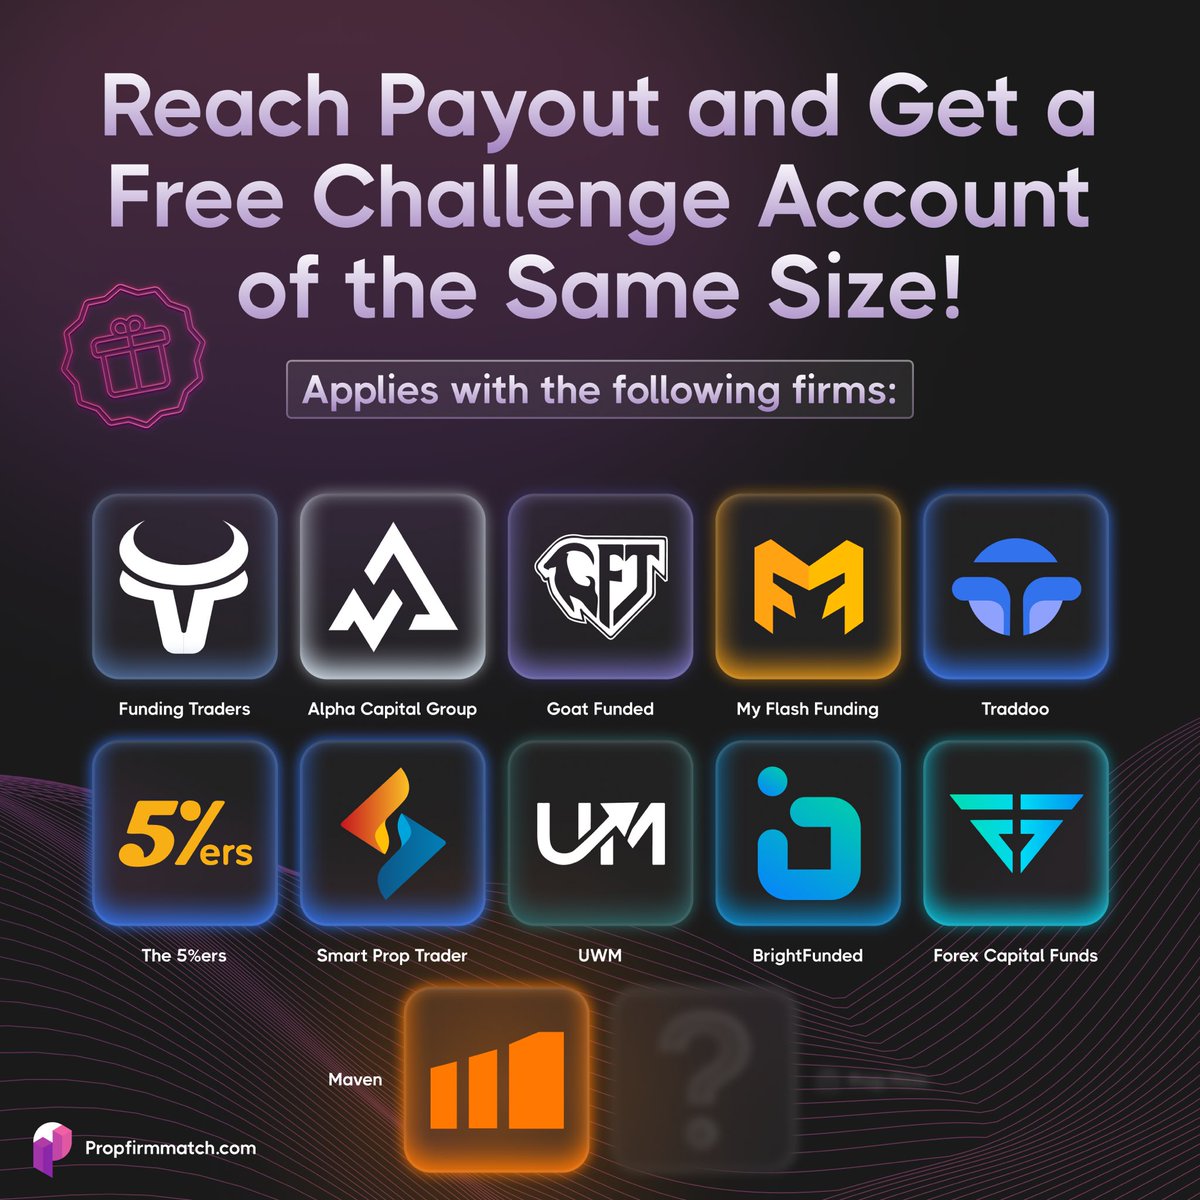 Next up: @Maventrading 16% off + free account if reaching payout Code MATCH ✅